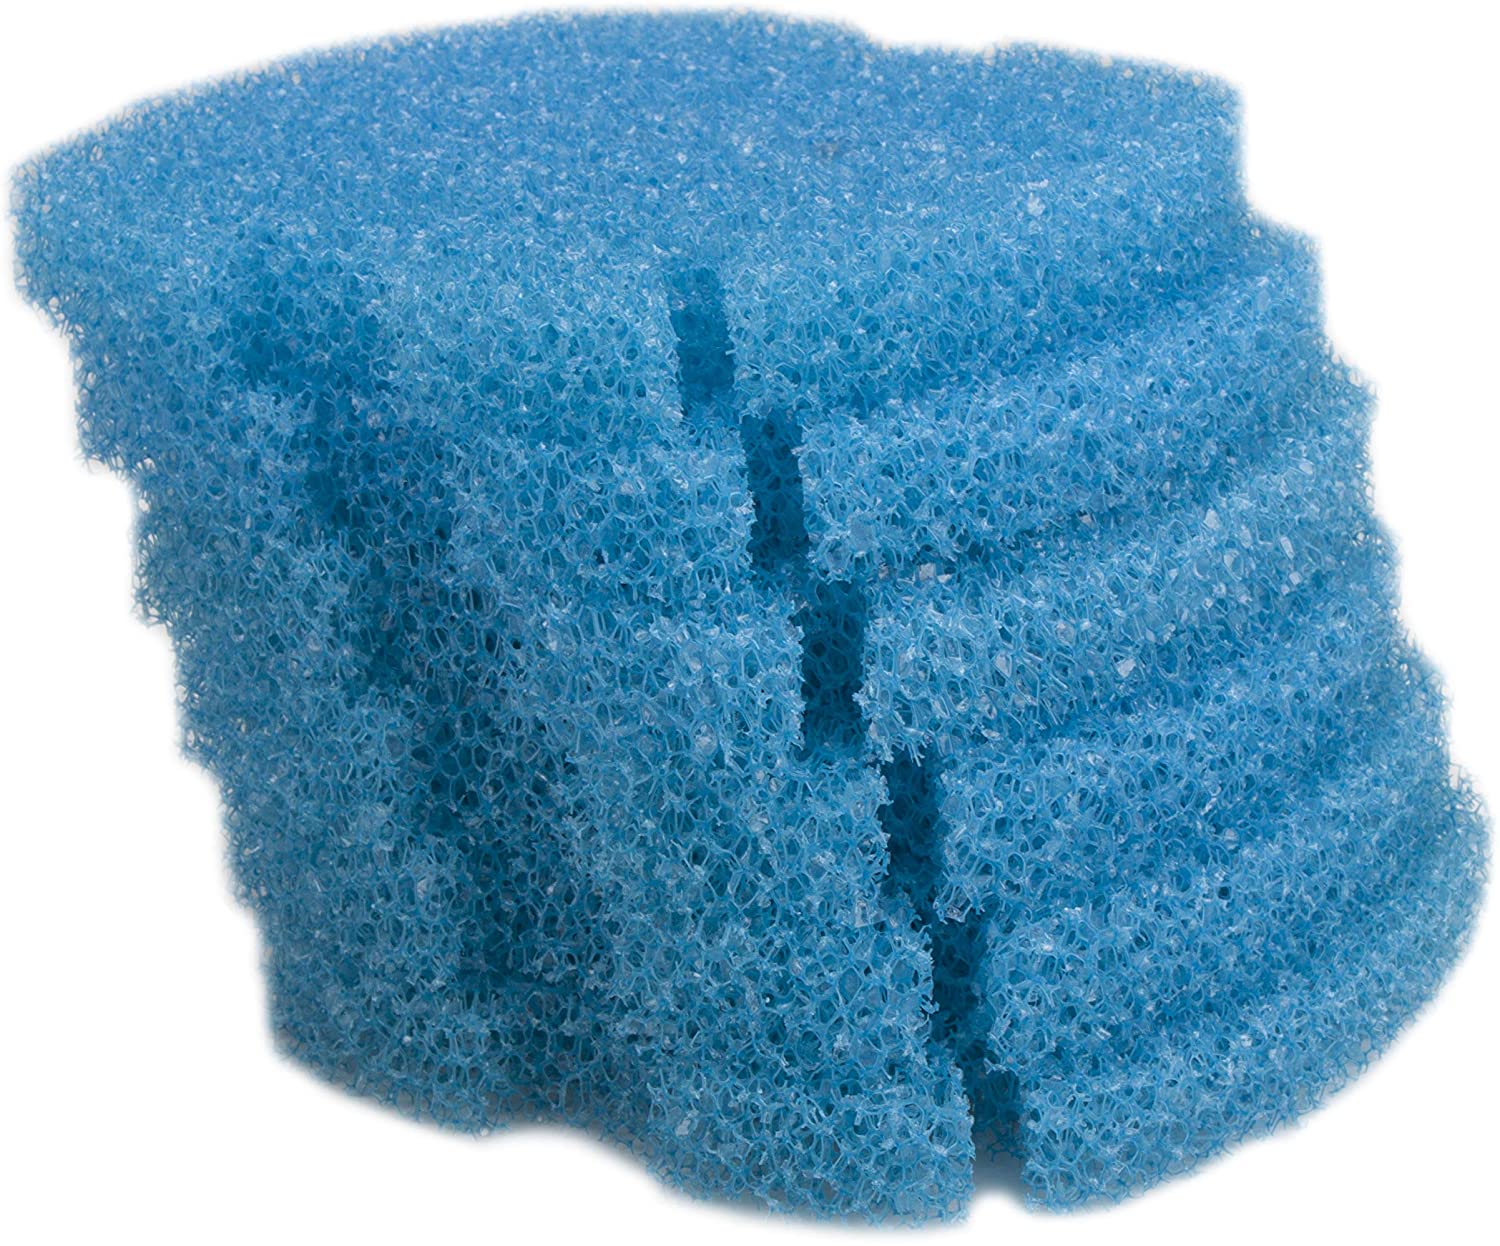 LTWHOME Compatible Blue Coarse Foam Replacement for Tetra VX-60 75 90, PVX-75 90 (Pack of 6)